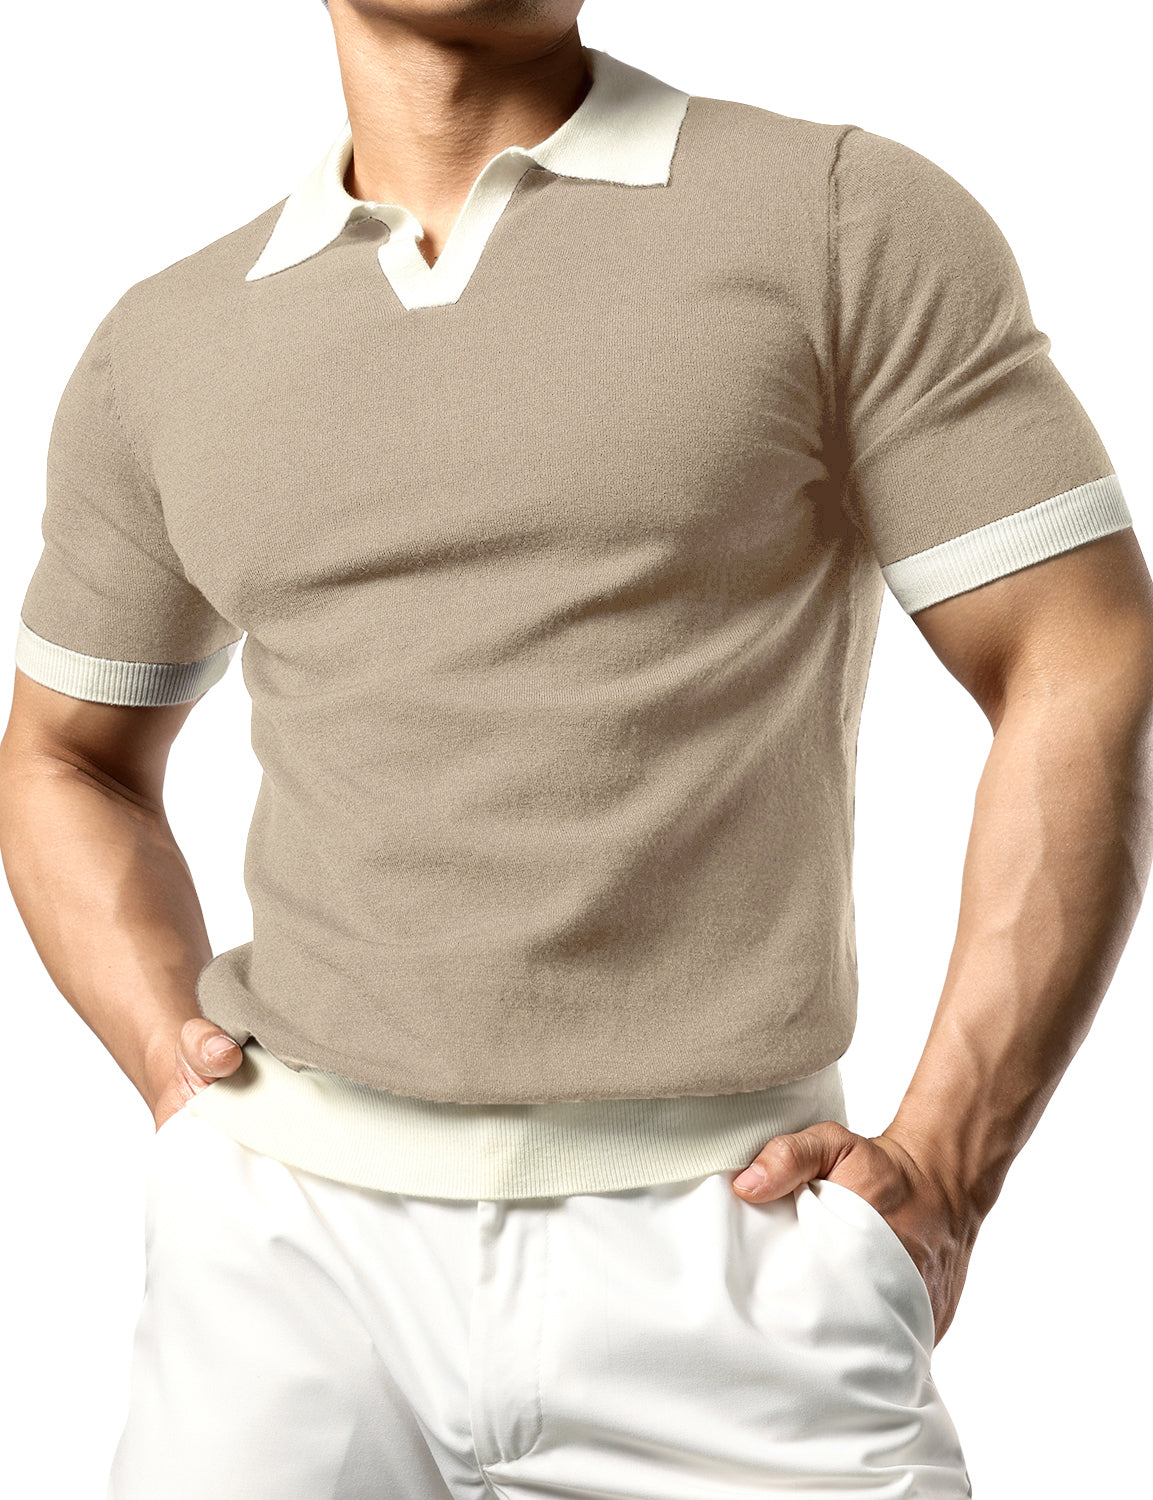 JOGAL Men's Muscle Slim Fit V Neck Knit Polo Shirts Short Sleeve Casual Pullover Golf Shirts